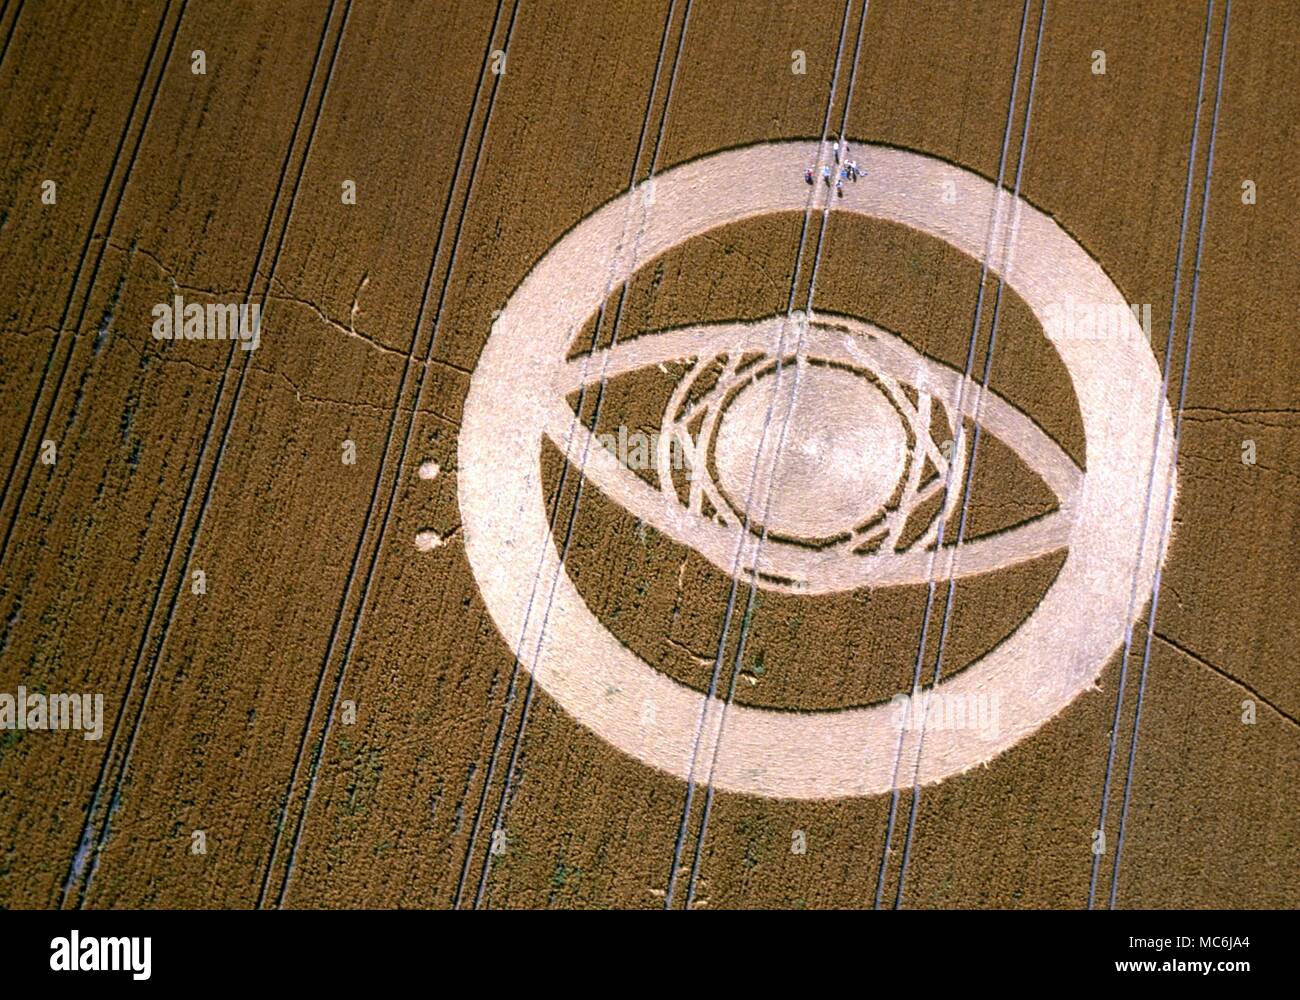 AERIAL BRITAIN. Corn circle in the shape of a giant eye, encircled by white circular band. photographed from helicopter, above Huish Ridge, north-west of Pewsey. Photographed on 5 August 1994 Stock Photo